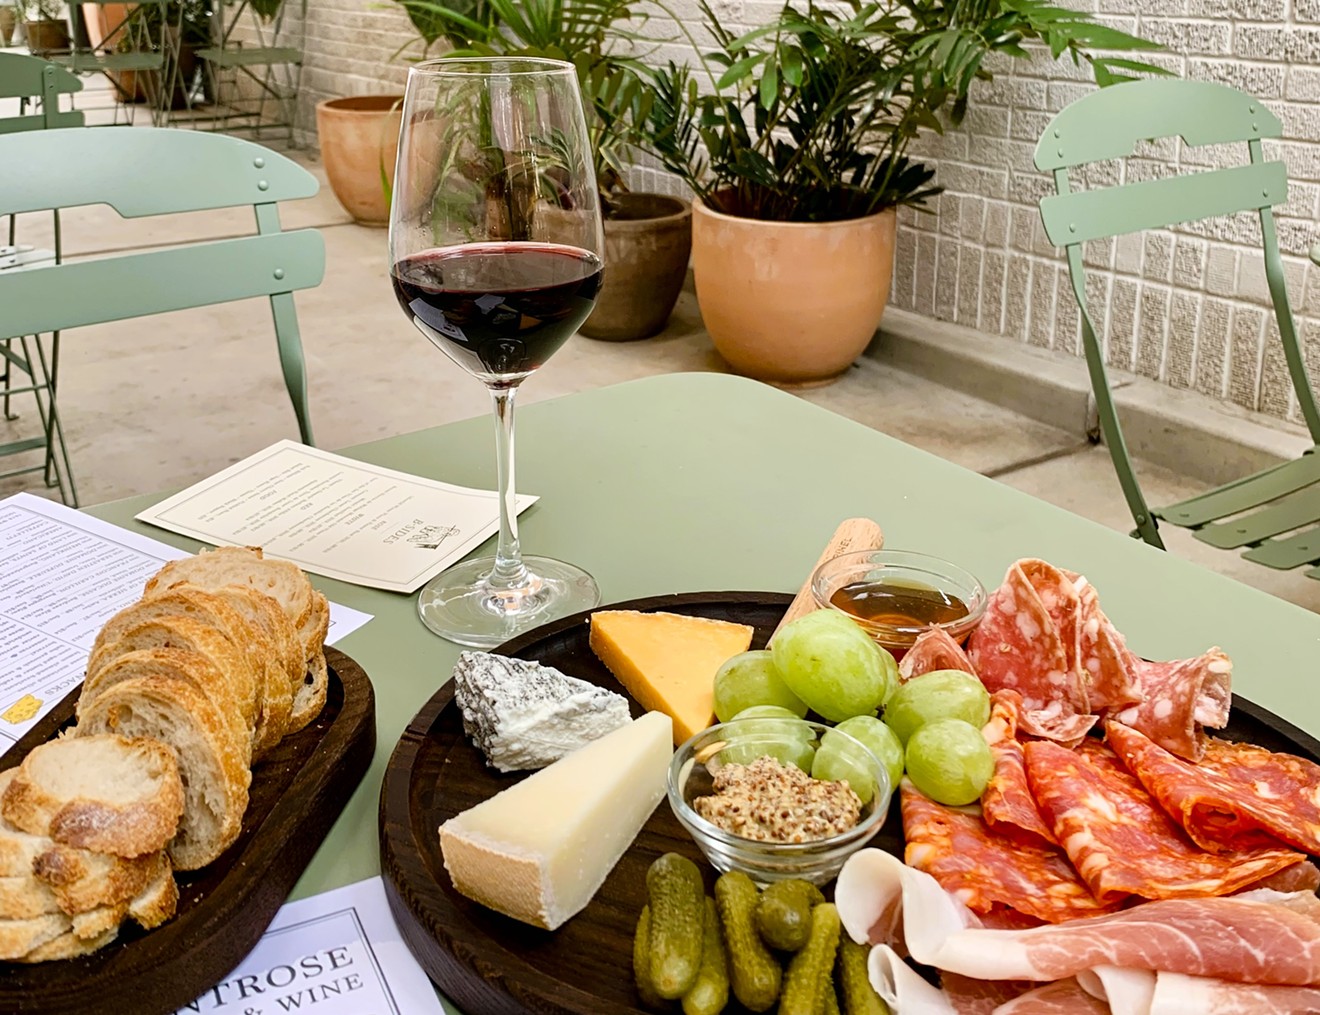 Sit out on the patio and unwind with fine cheeses and wines at this Best Cheese Shop winner.